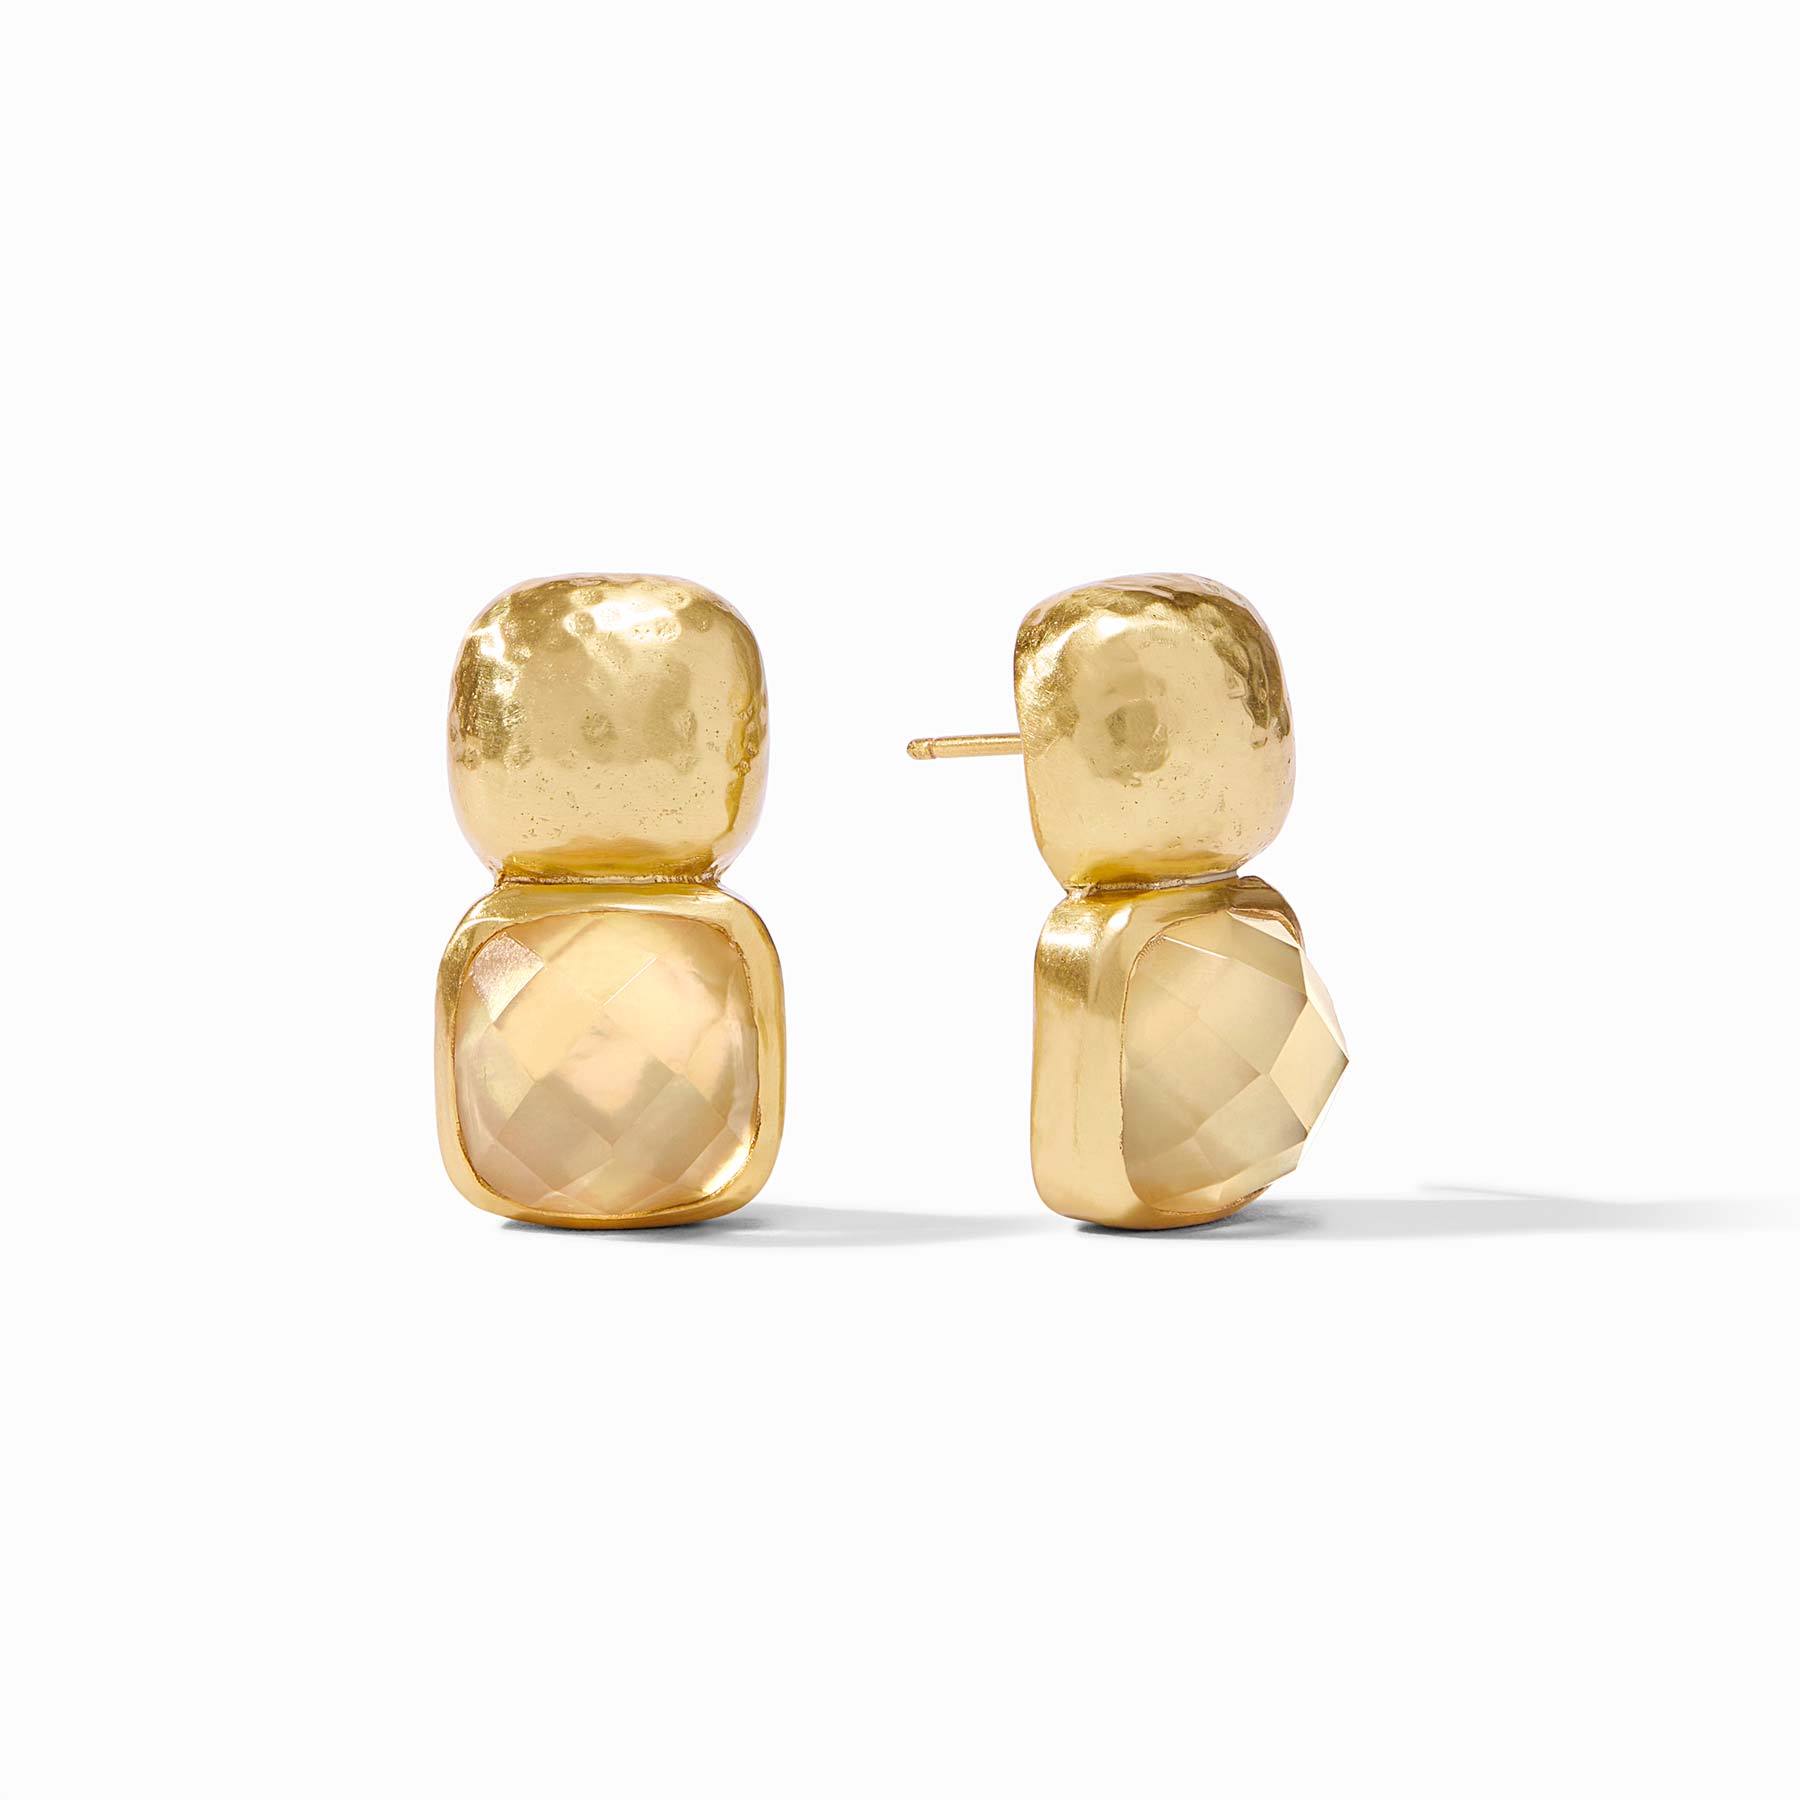 Julie Vos - Catalina Earring, Iridescent Champagne